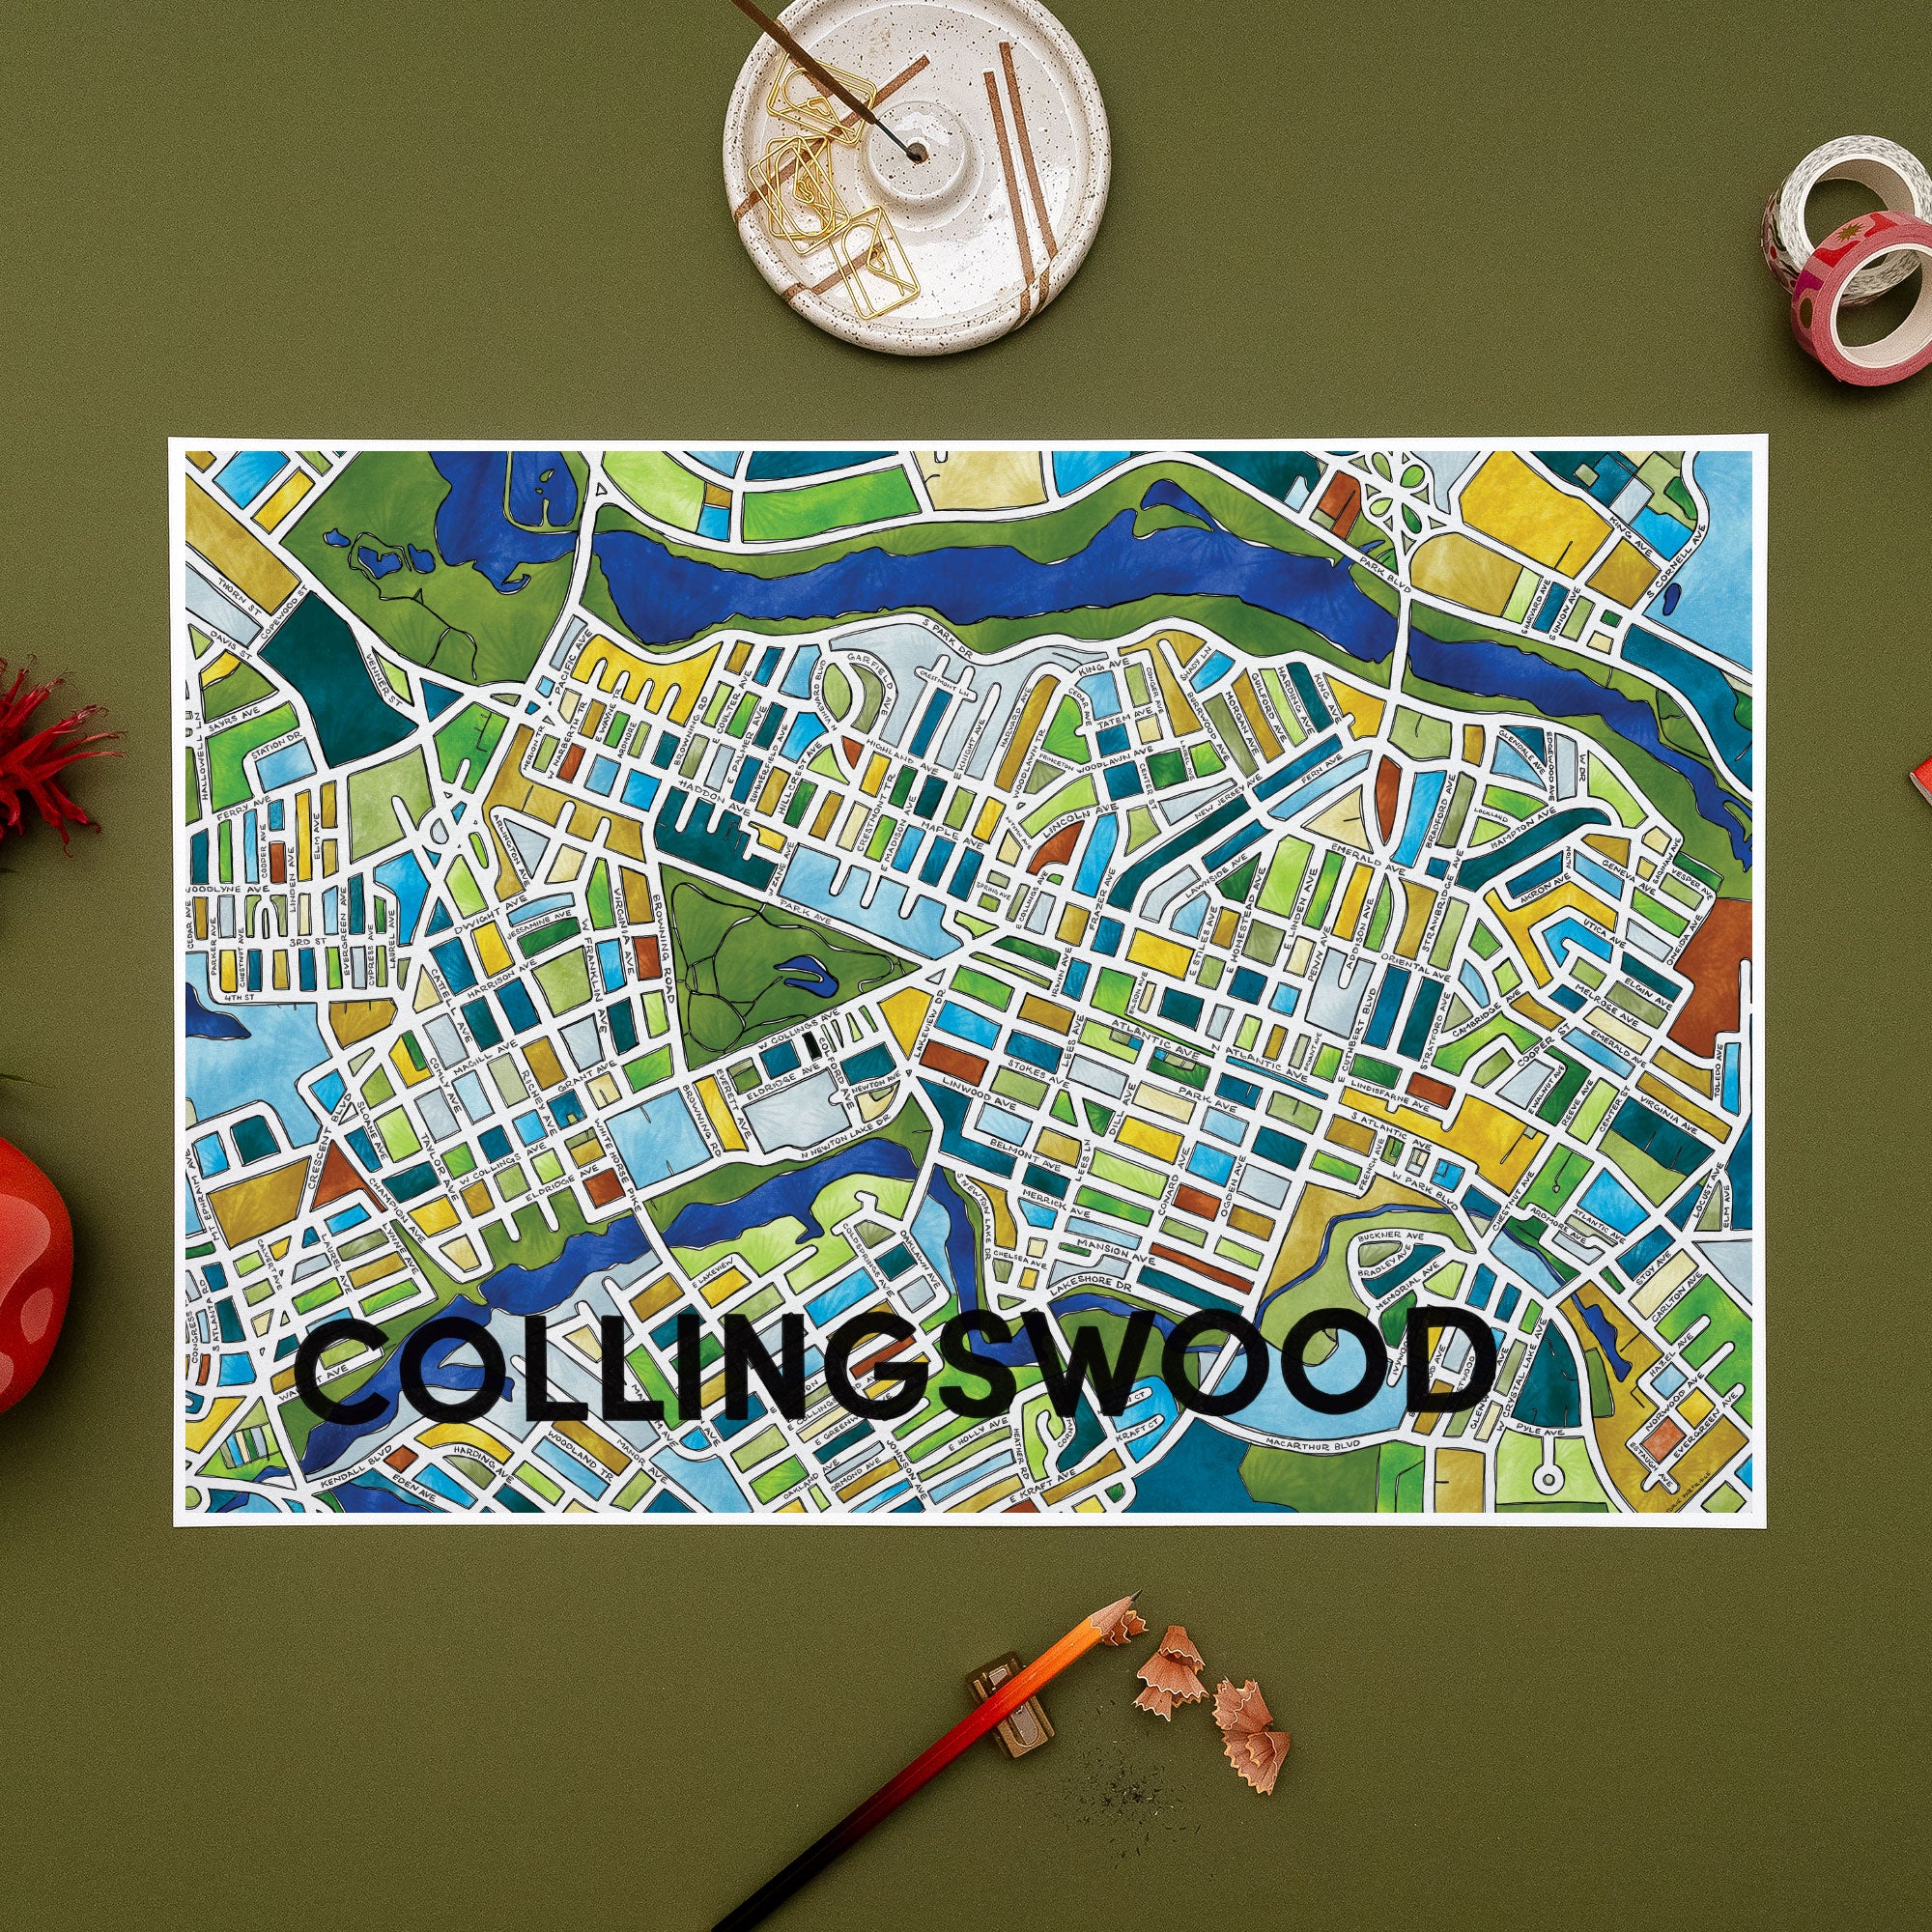 Collingswood (New Jersey) Print